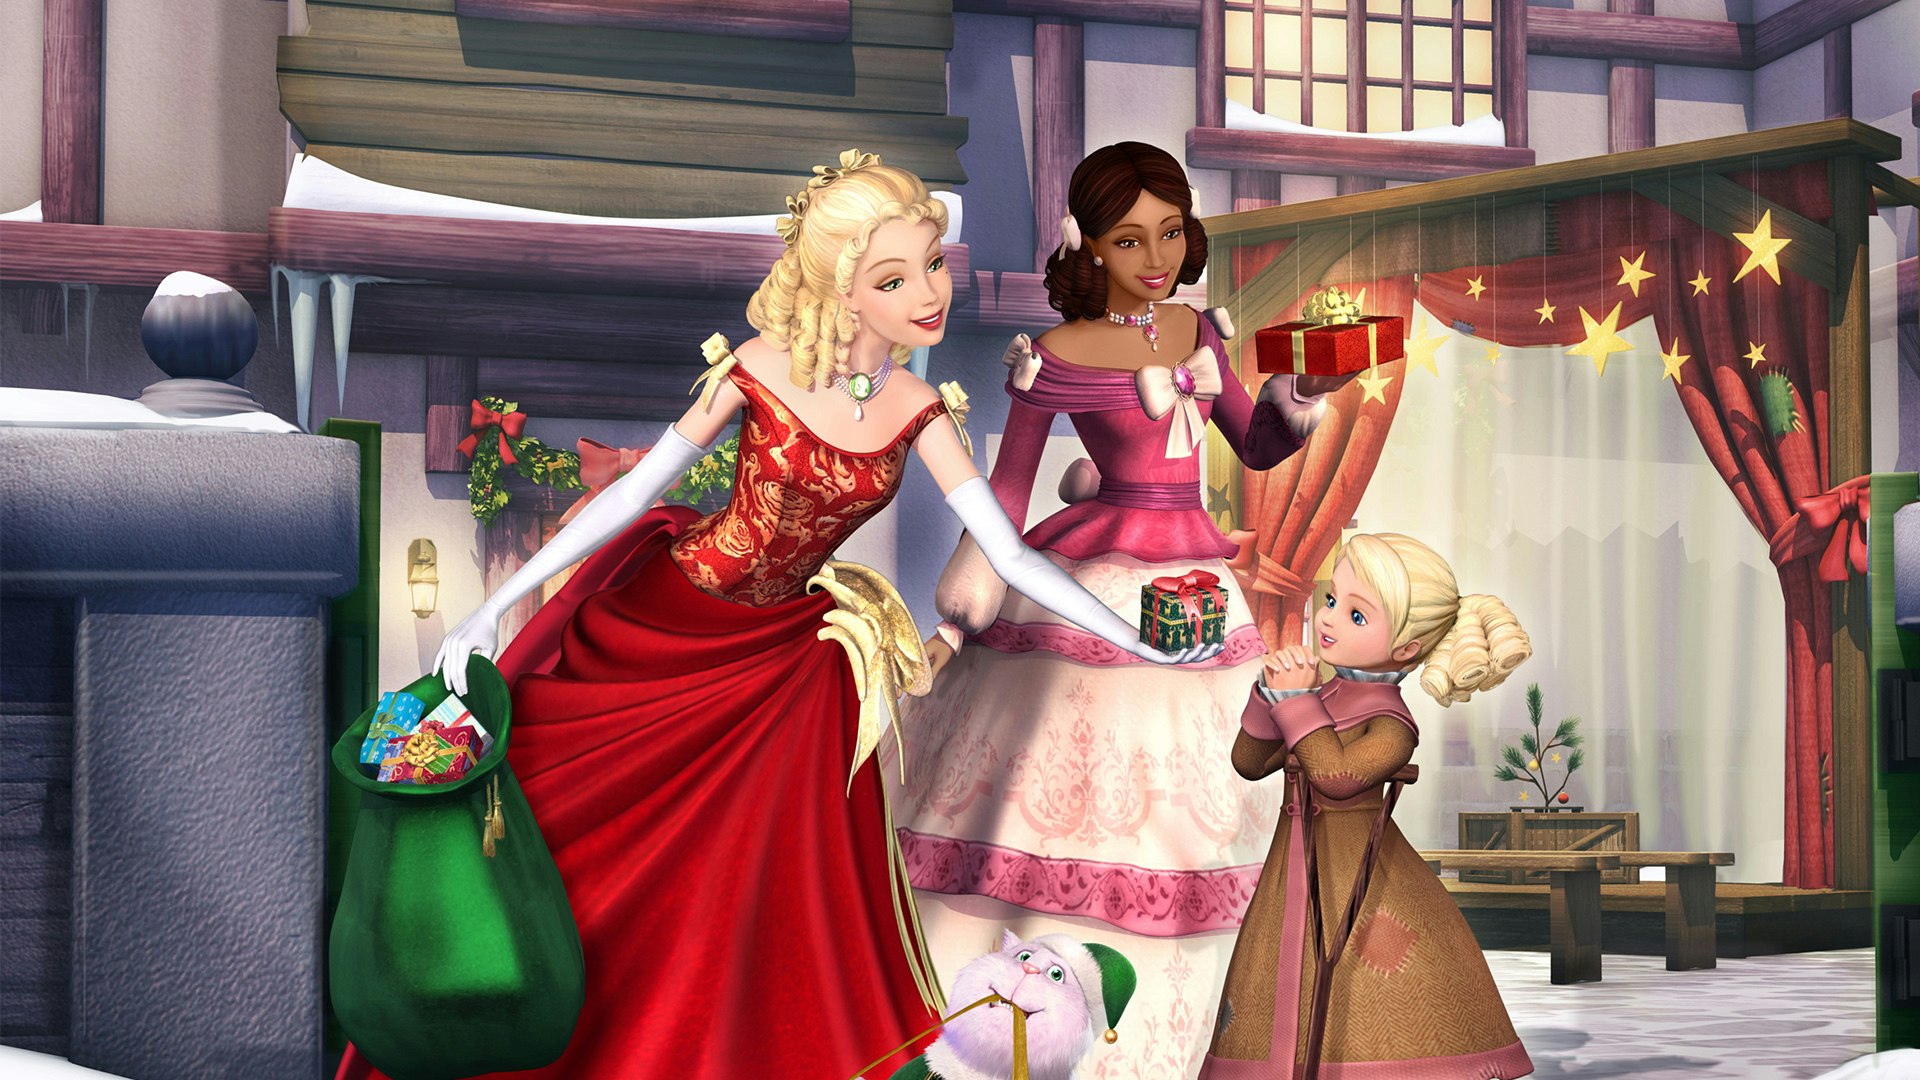 Watch Barbie in A Christmas Carol Online with NEON